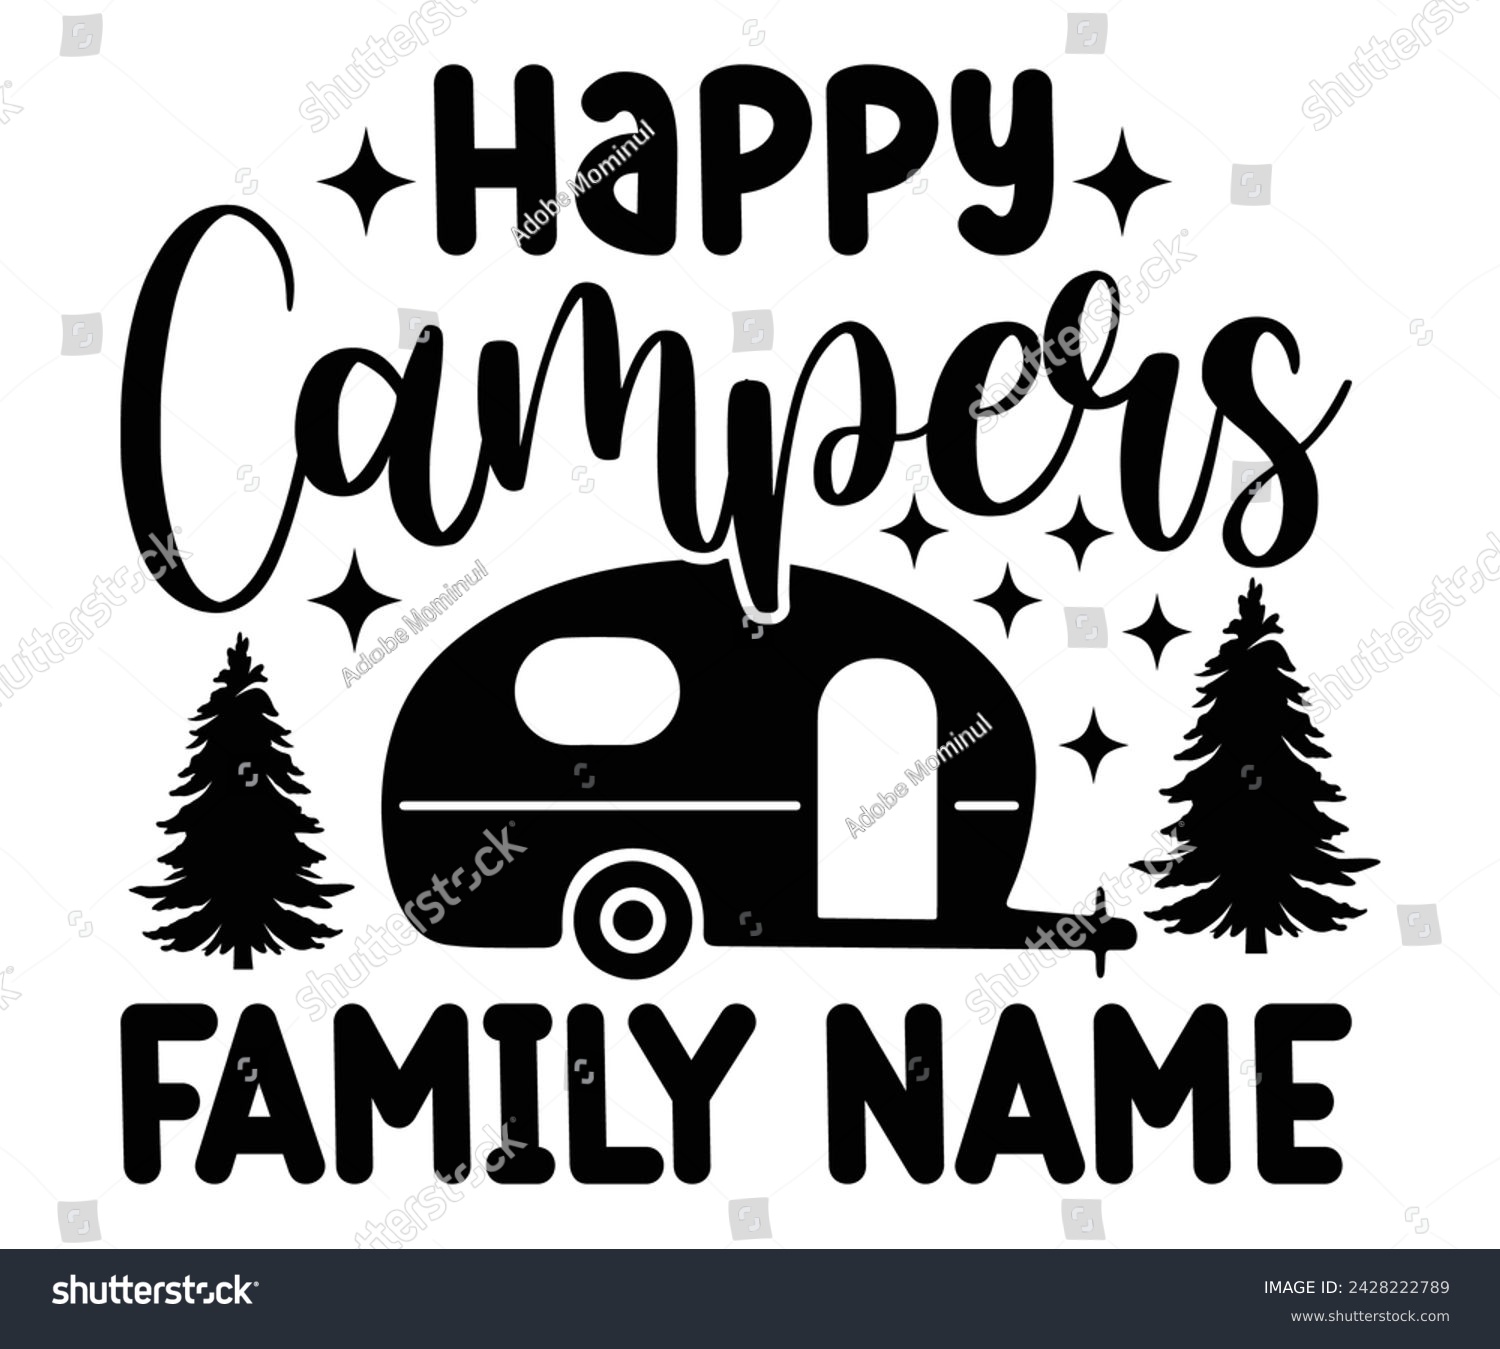 SVG of Happy Camper's Family Name Svg,Happy Camper Svg,Camping Svg,Adventure Svg,Hiking Svg,Camp Saying,Camp Life Svg,Svg Cut Files, Png,Mountain T-shirt,Instant Download svg